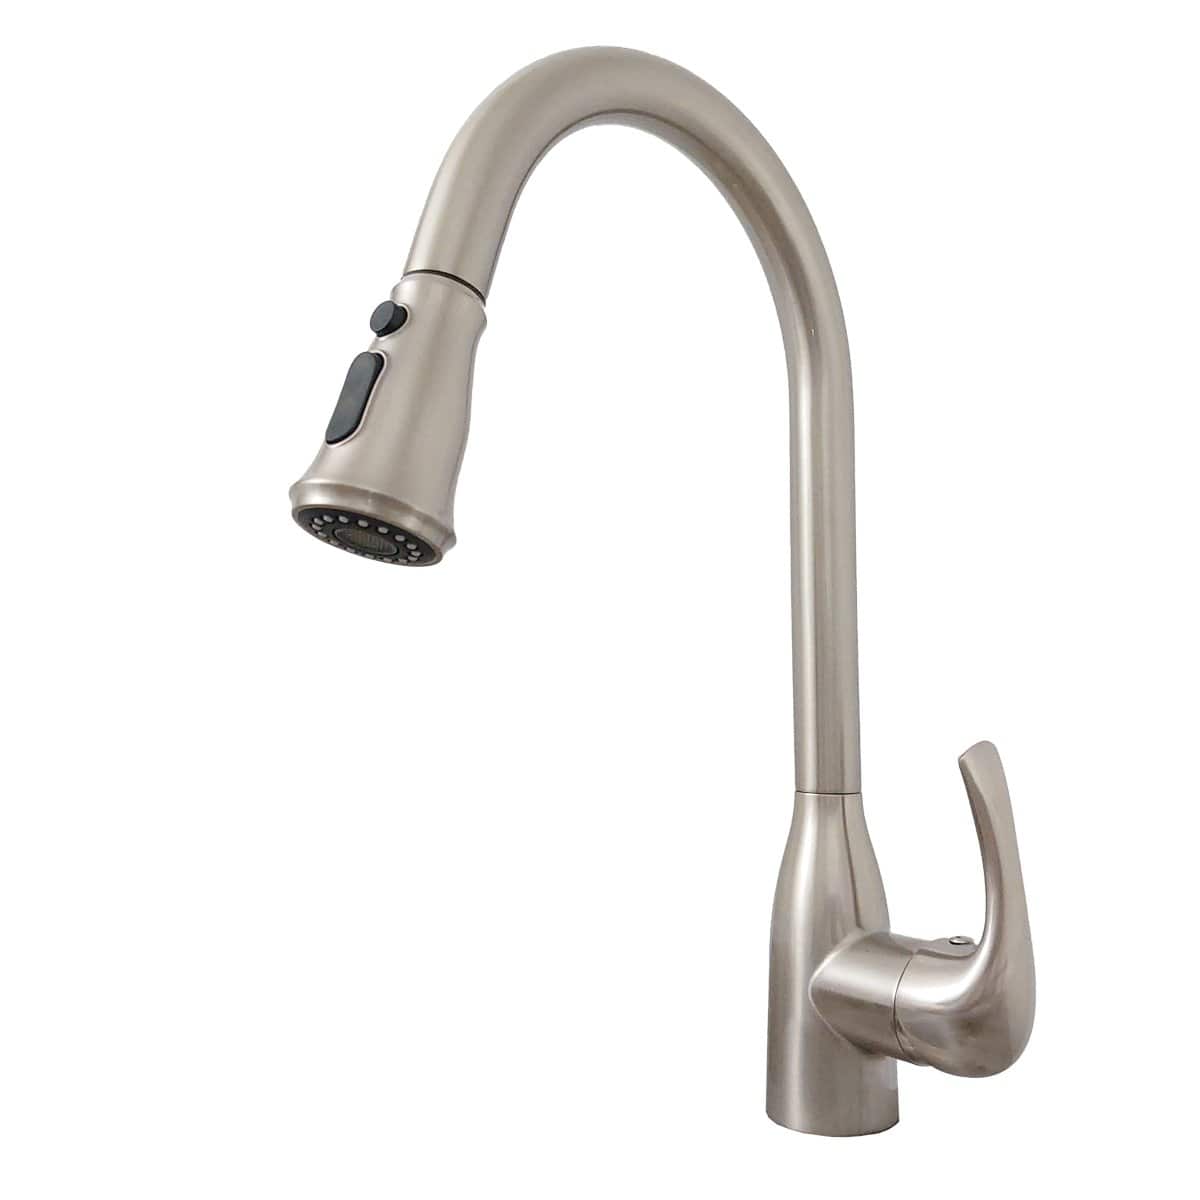 Dakota Signature Series 16″ Tall Dual Function Pullout handle with a Retro Style Faucet - MolaixKitchen FaucetsDSF-16KPO01BN